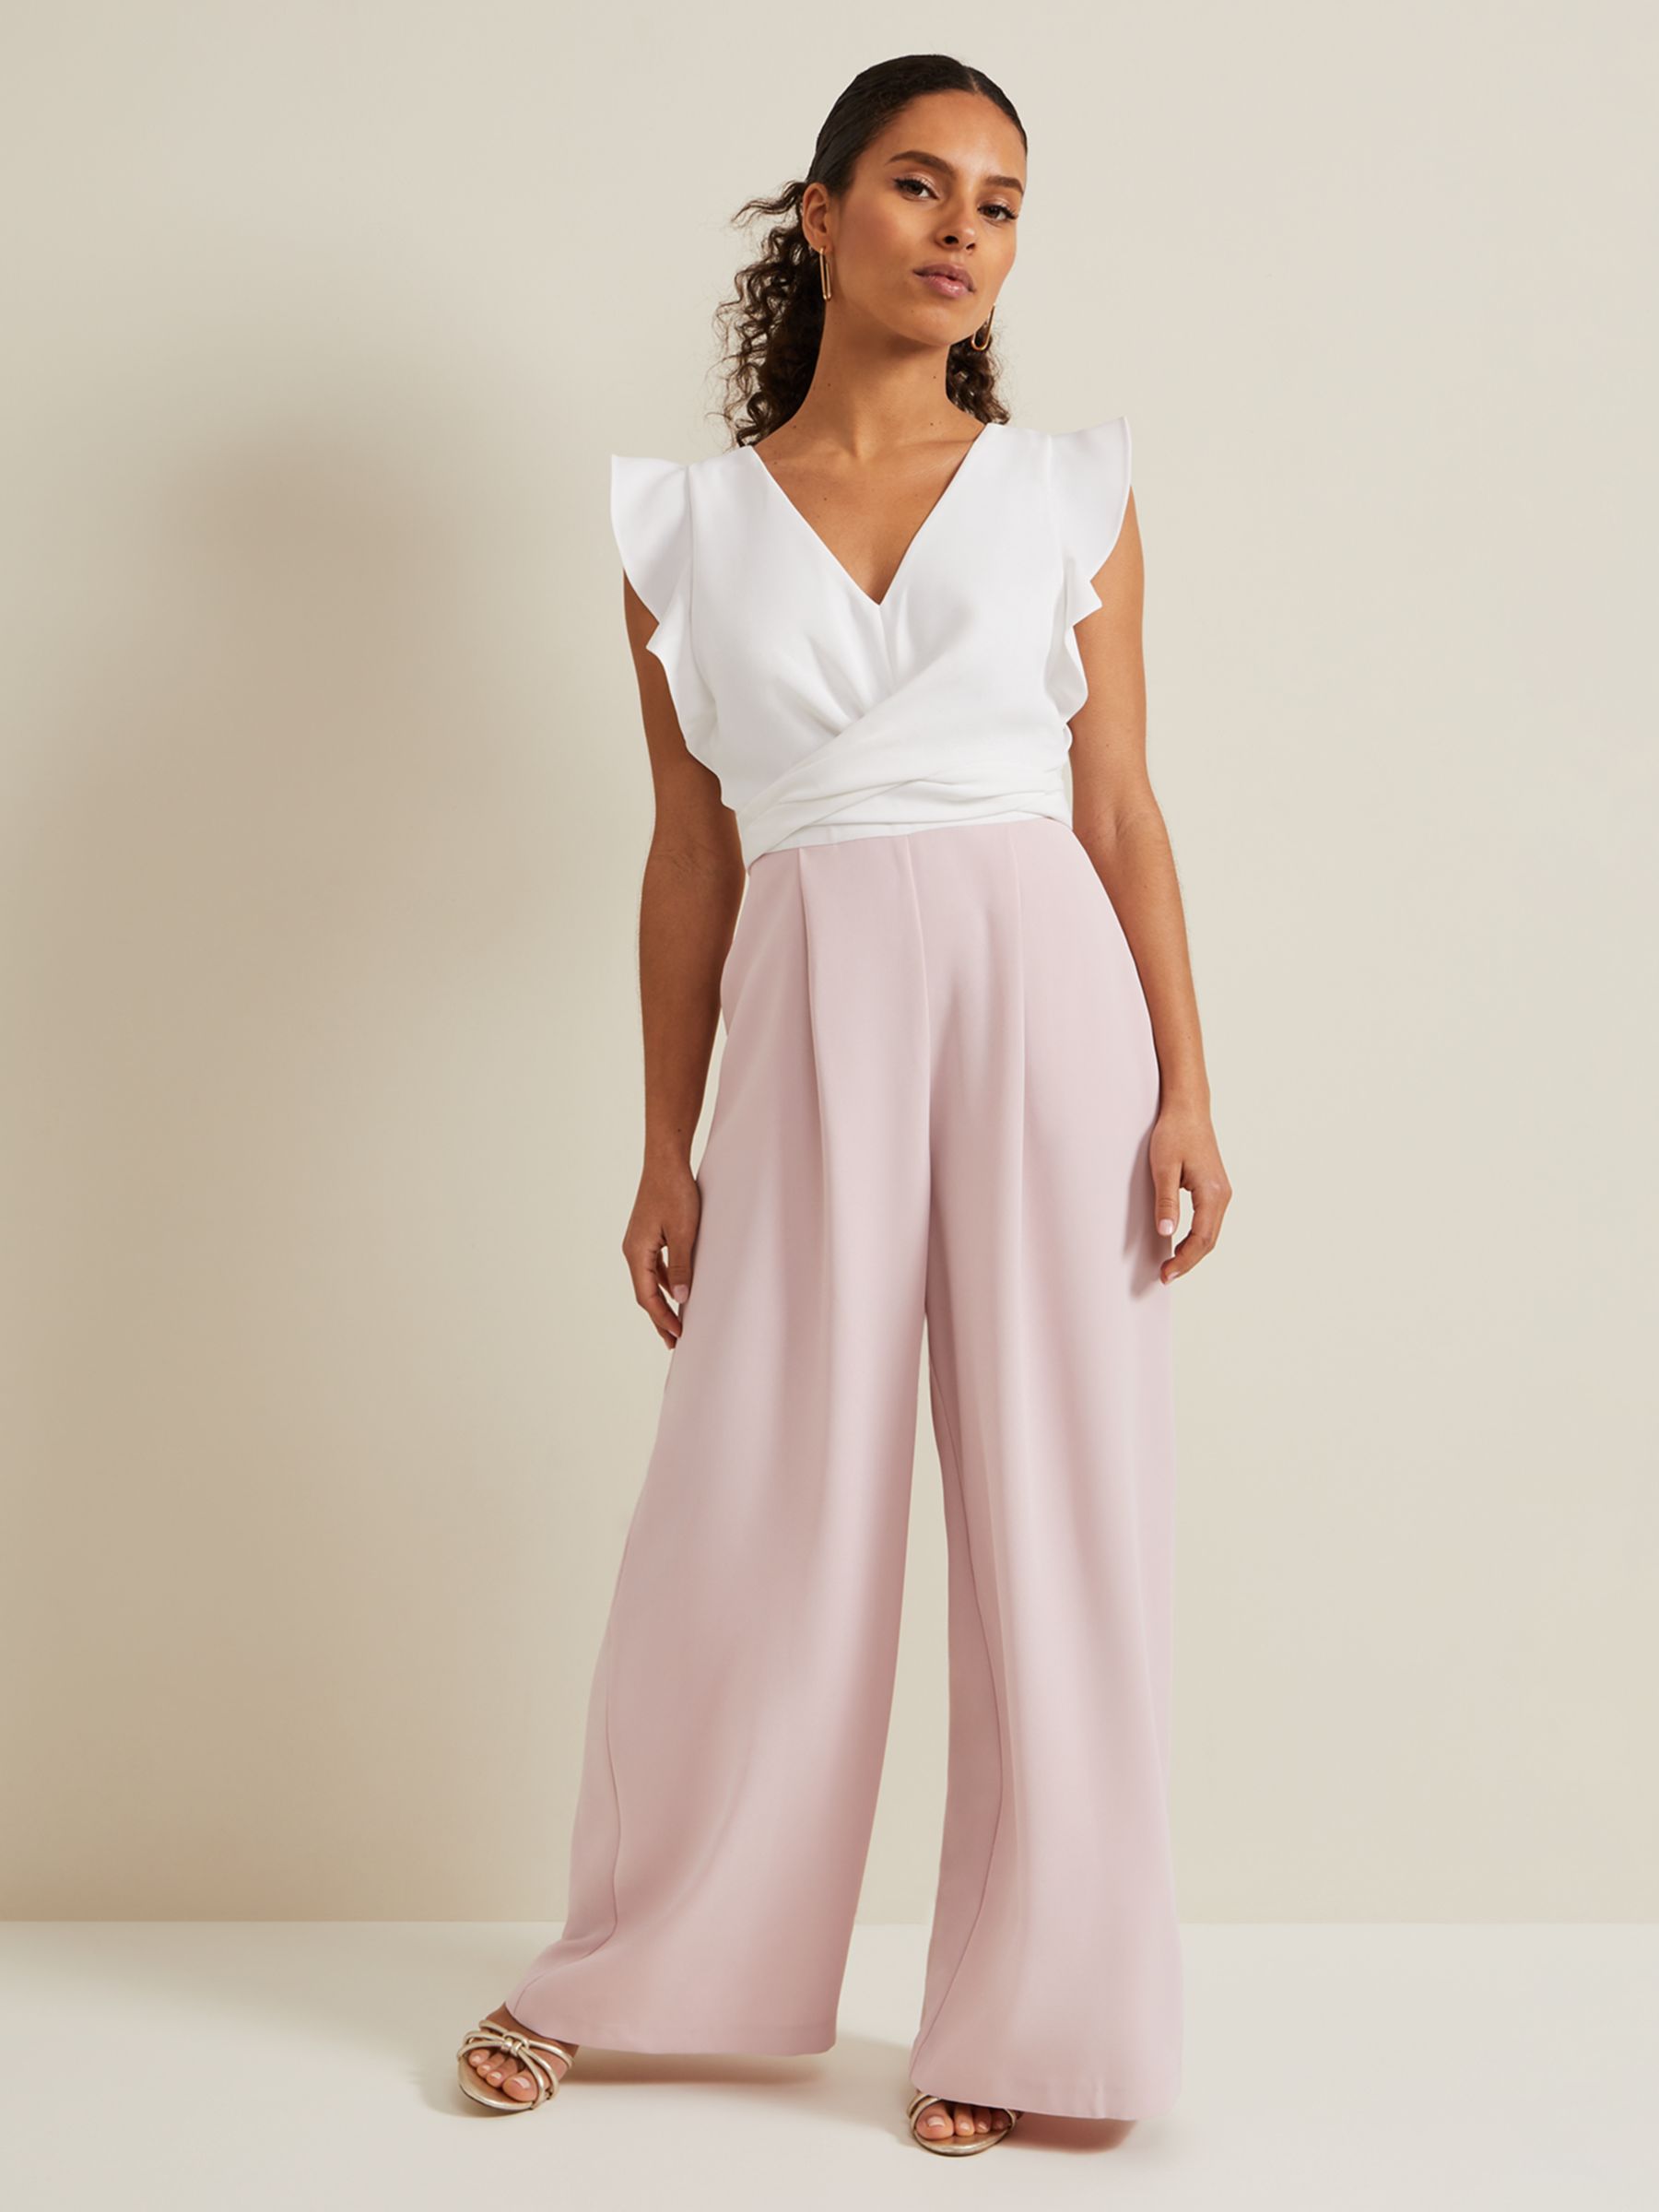 Other Half Cream Satin Cowl Neck Wide Leg Jumpsuit With Cross Back